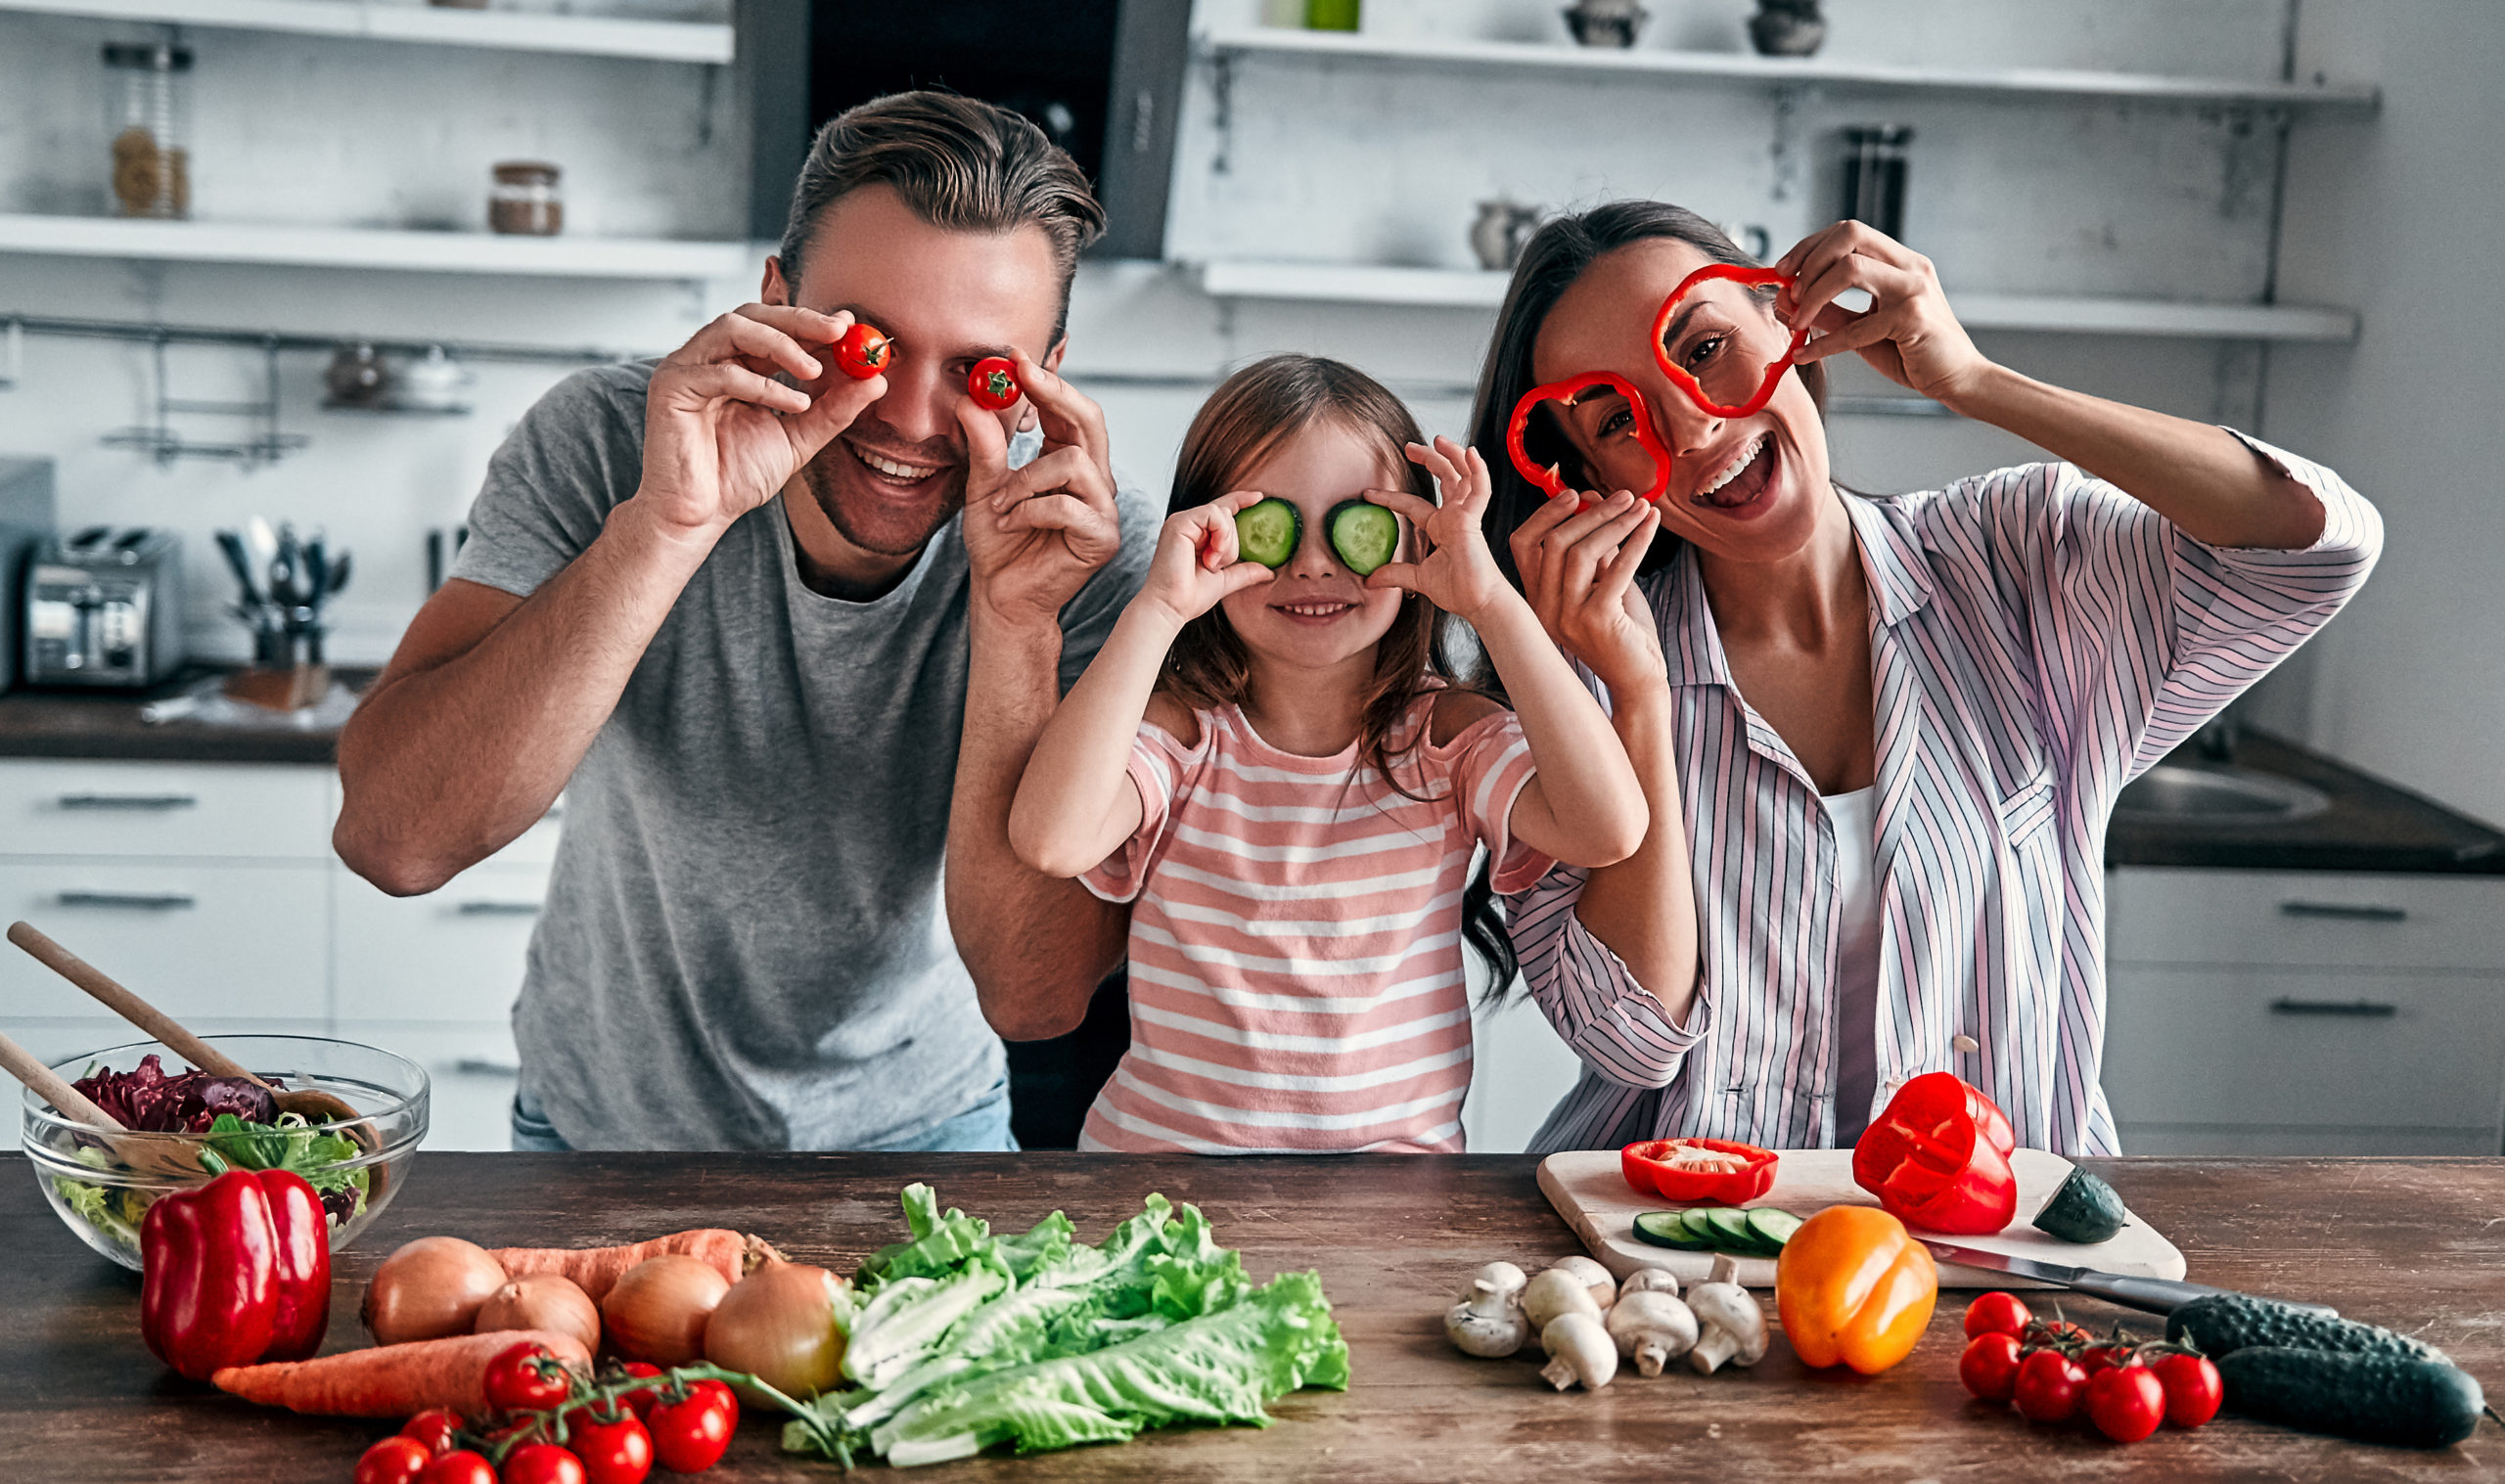 4 Epic Benefits to Cooking with Kids